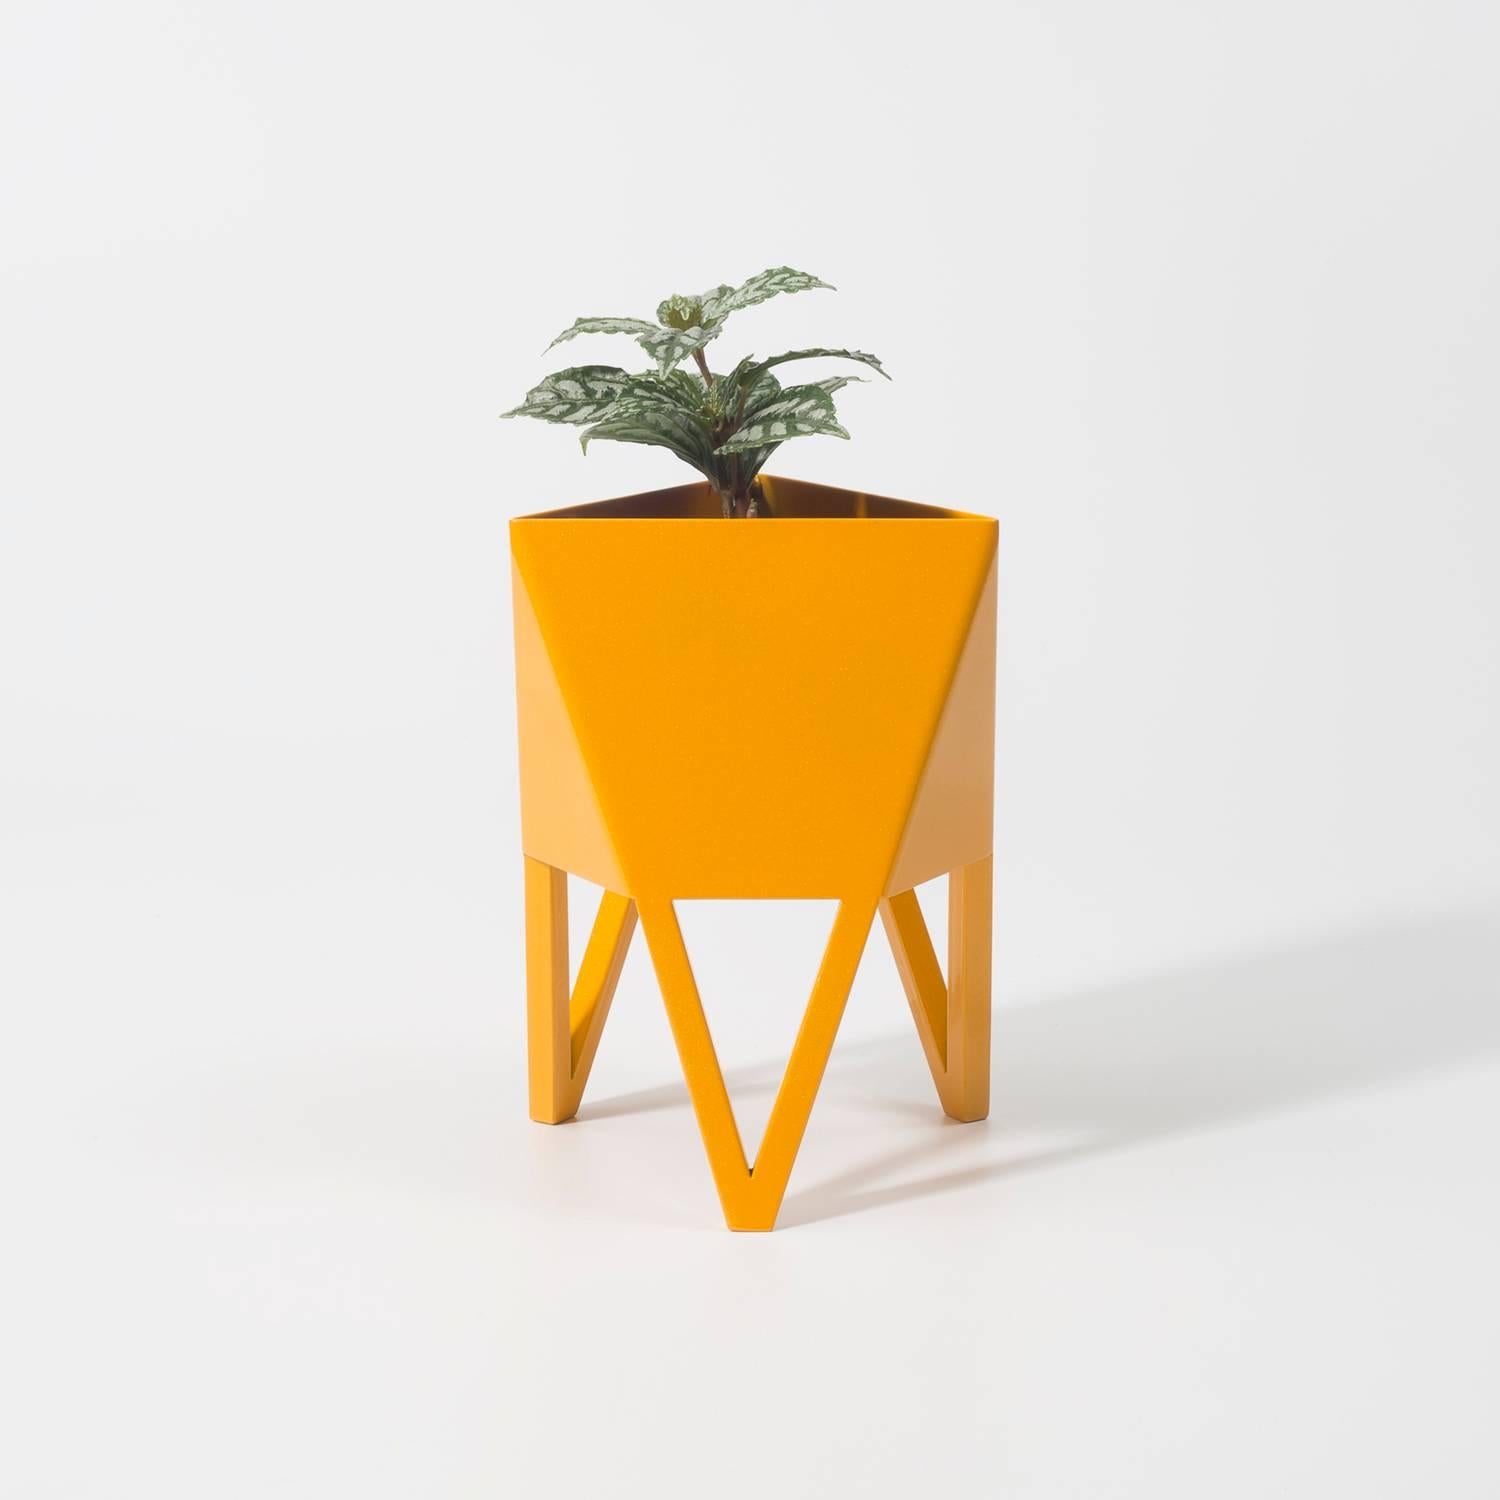 Deca Planter in Living Coral Steel, Medium, by Force/Collide 5